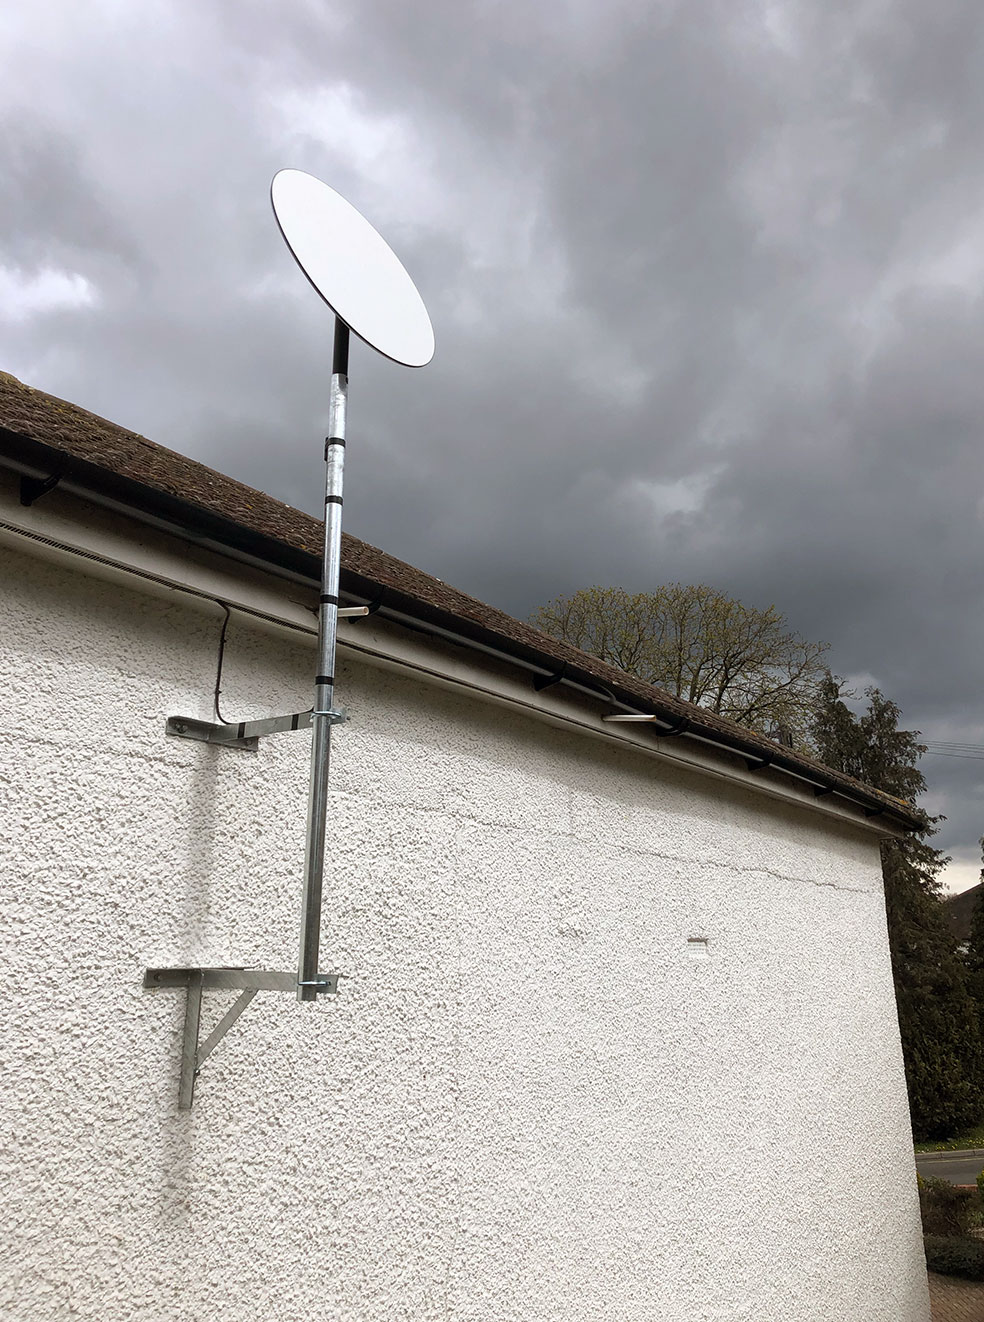 Professional satellite installation using our own manufactured parts. Bromley, SE London, Kent